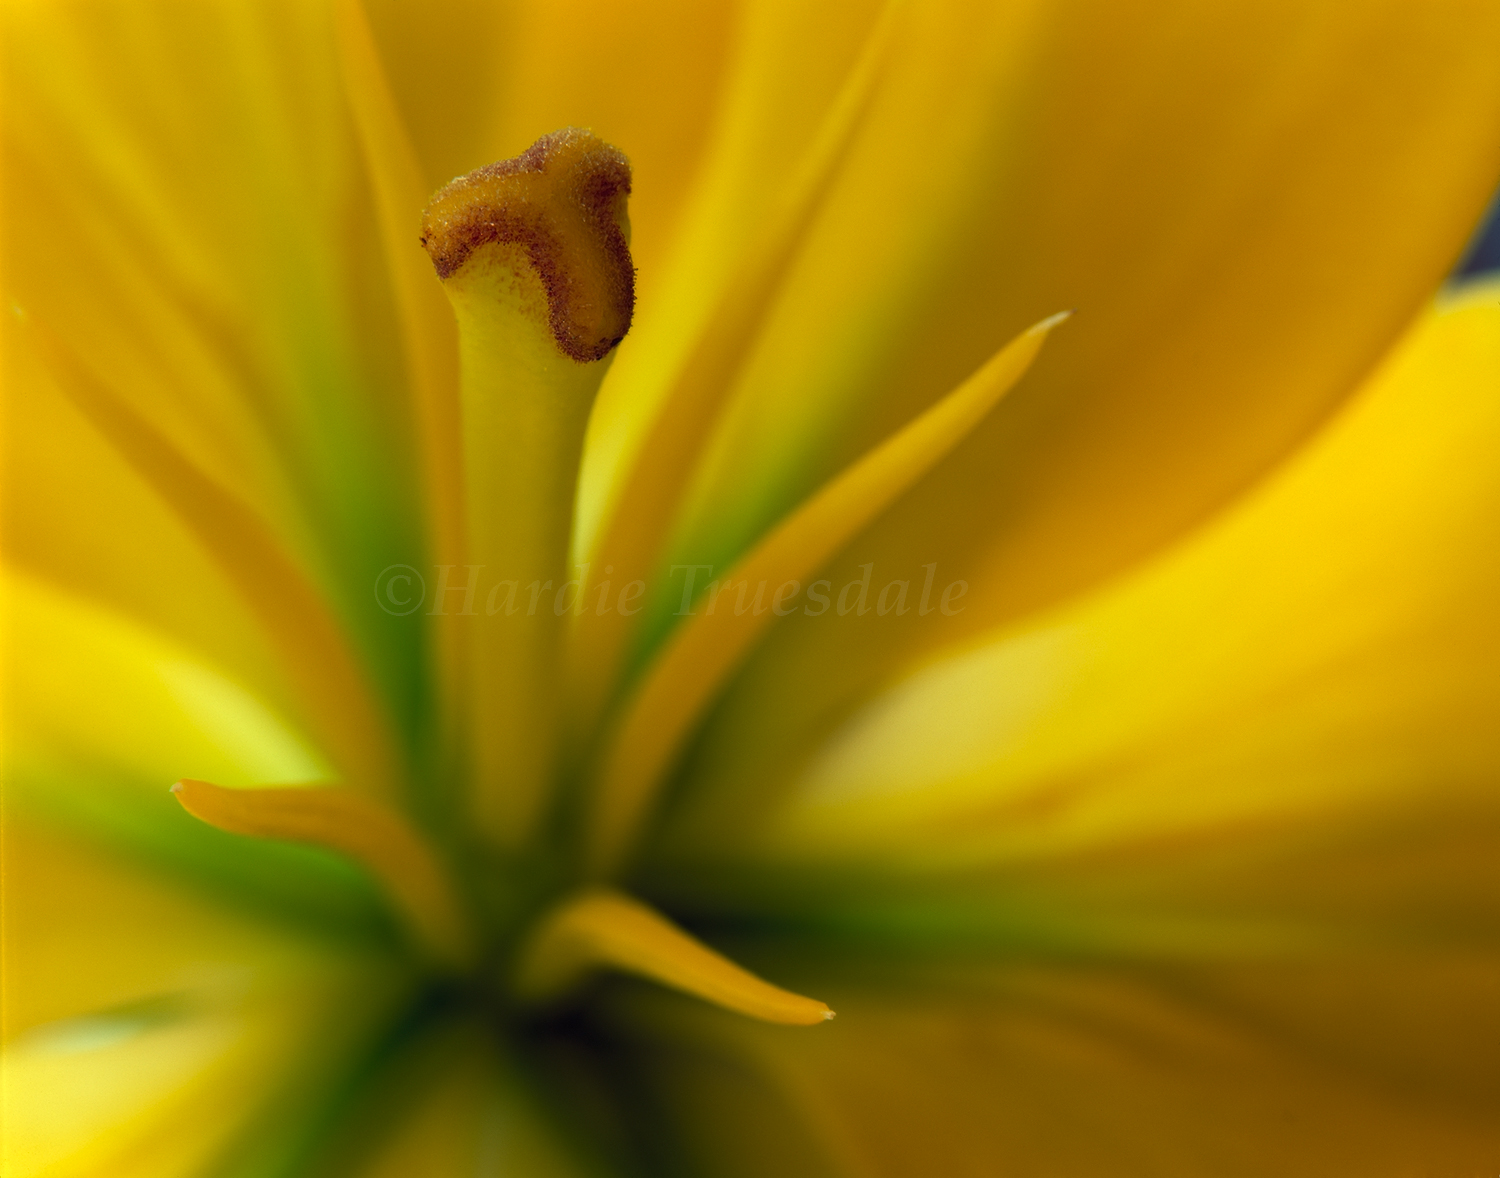  Fwr#1 &nbsp;"Yellow Lily Detail" 